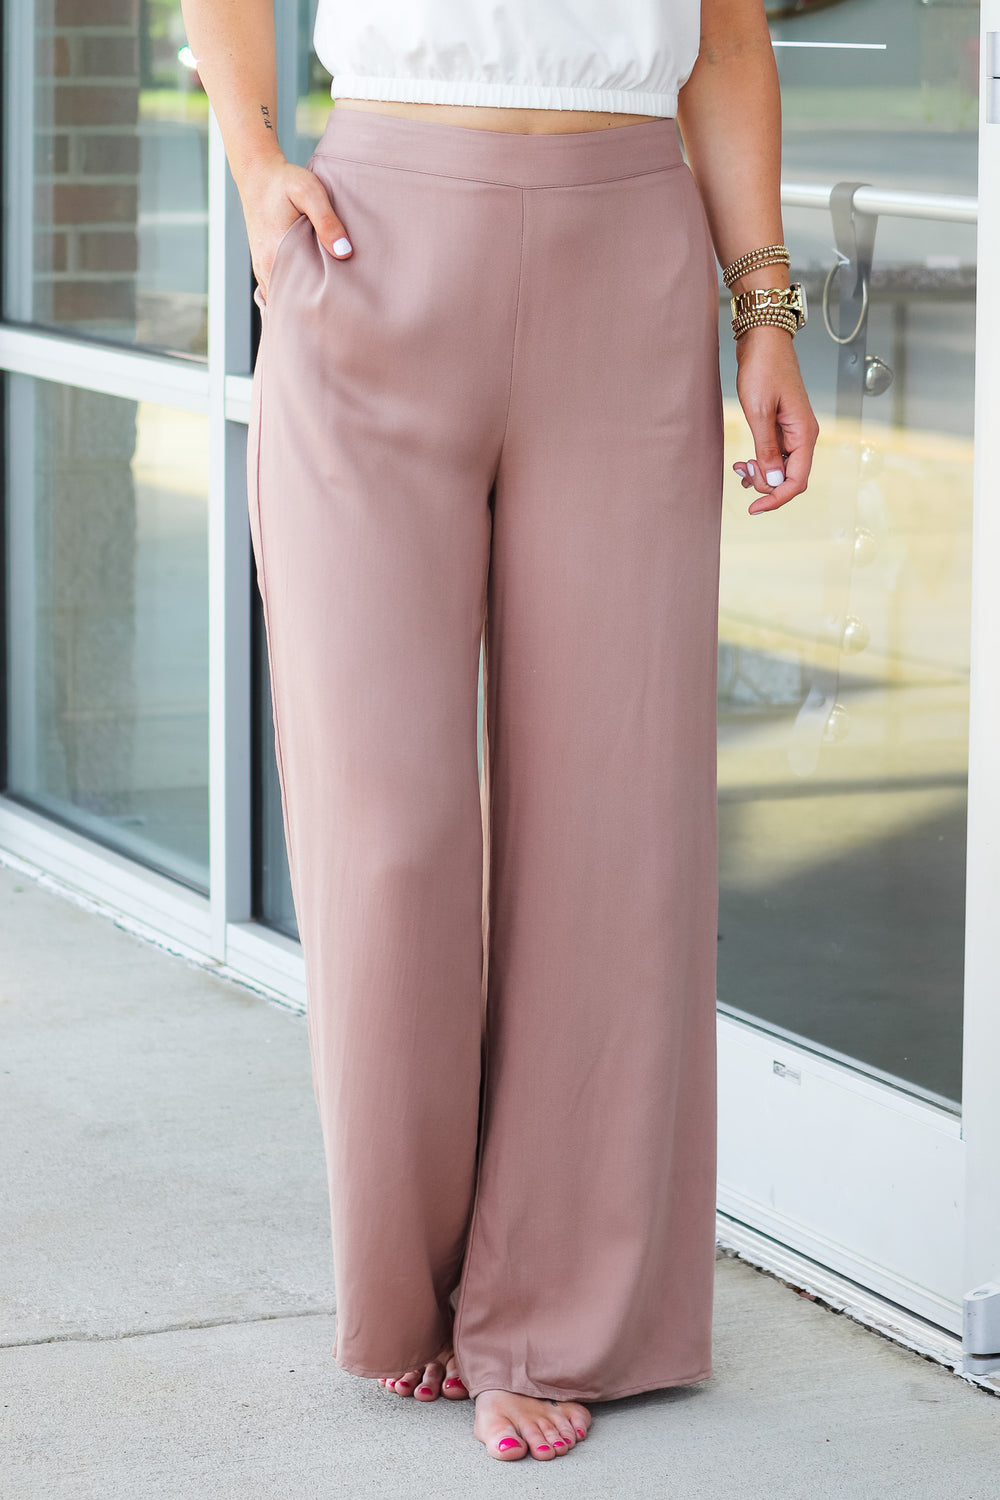 Ivy Lane Baby Pink Trousers